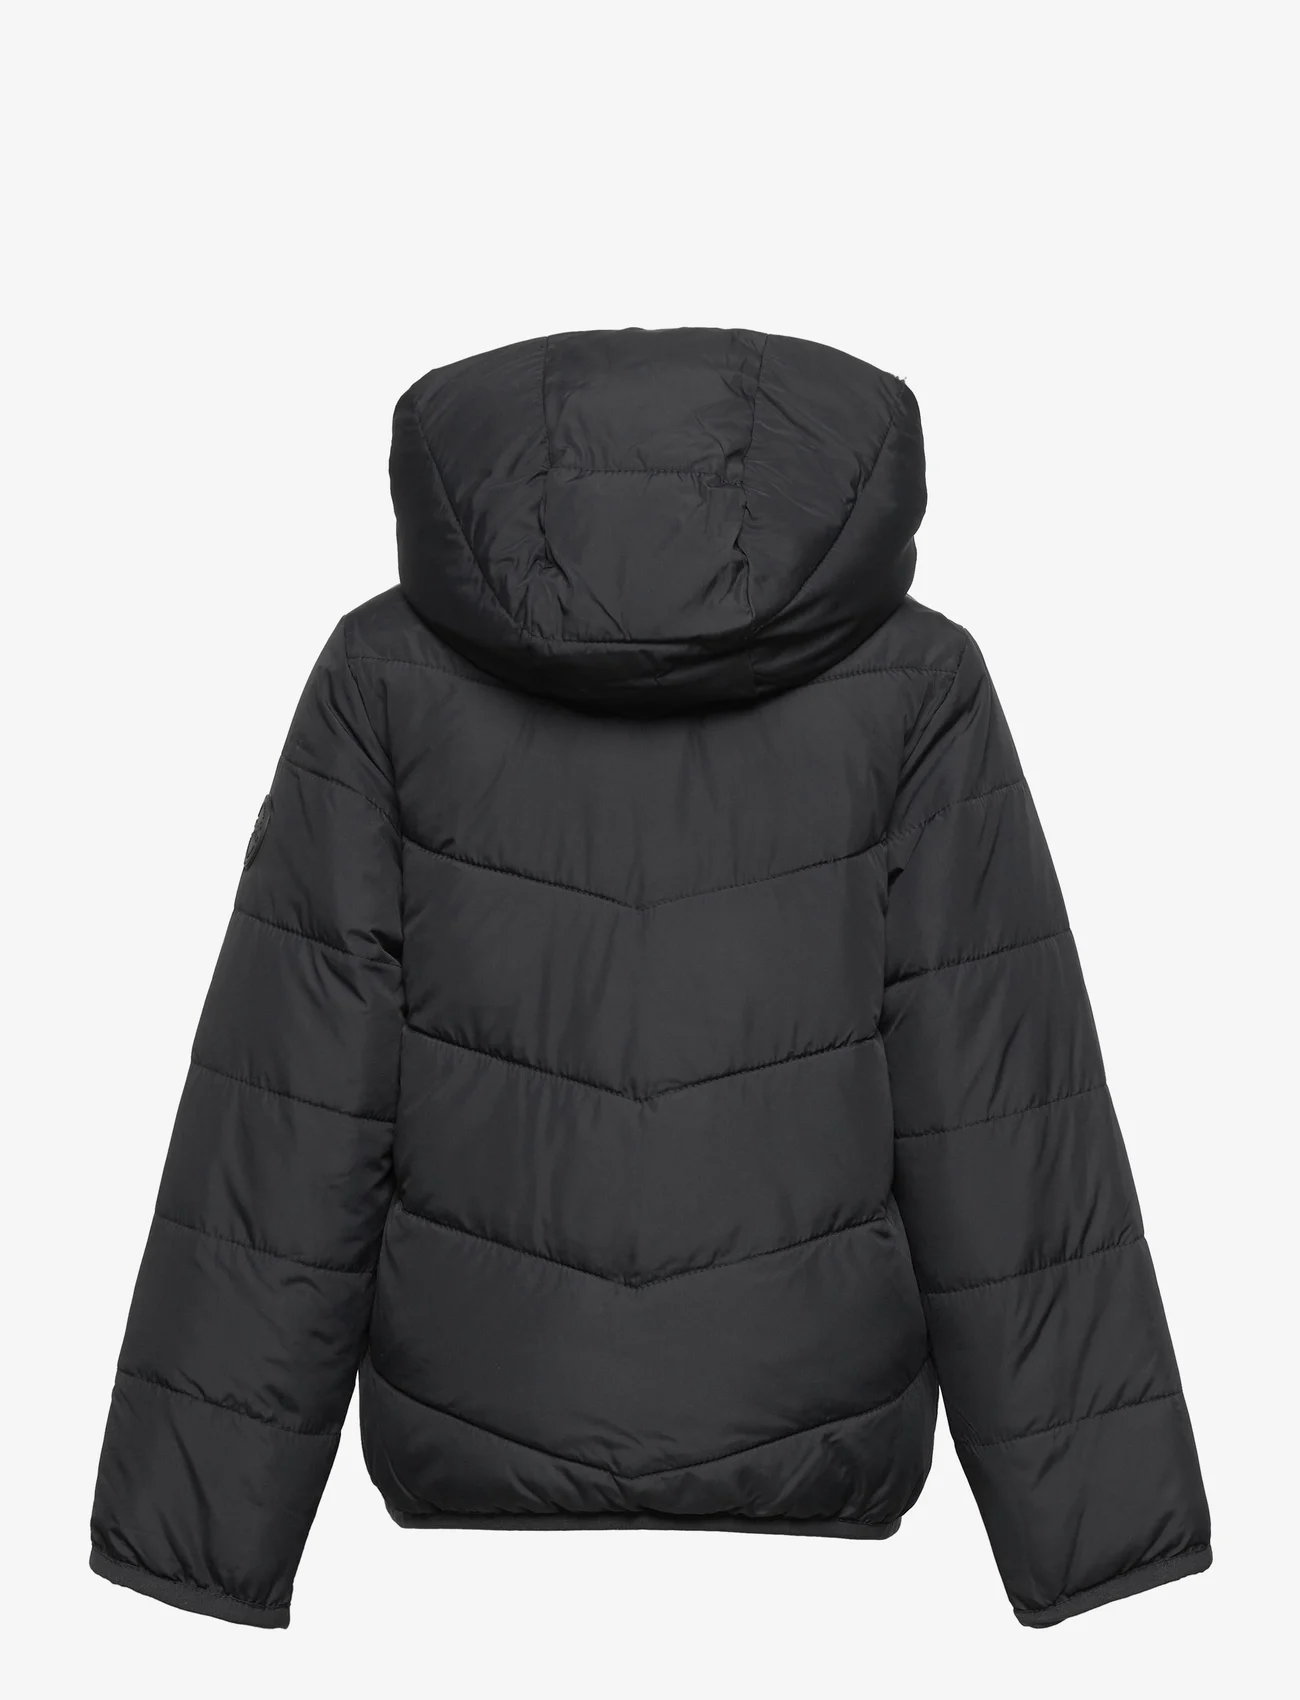 Abercrombie & Fitch - kids GIRLS OUTERWEAR - untuva- & toppatakit - black - 1